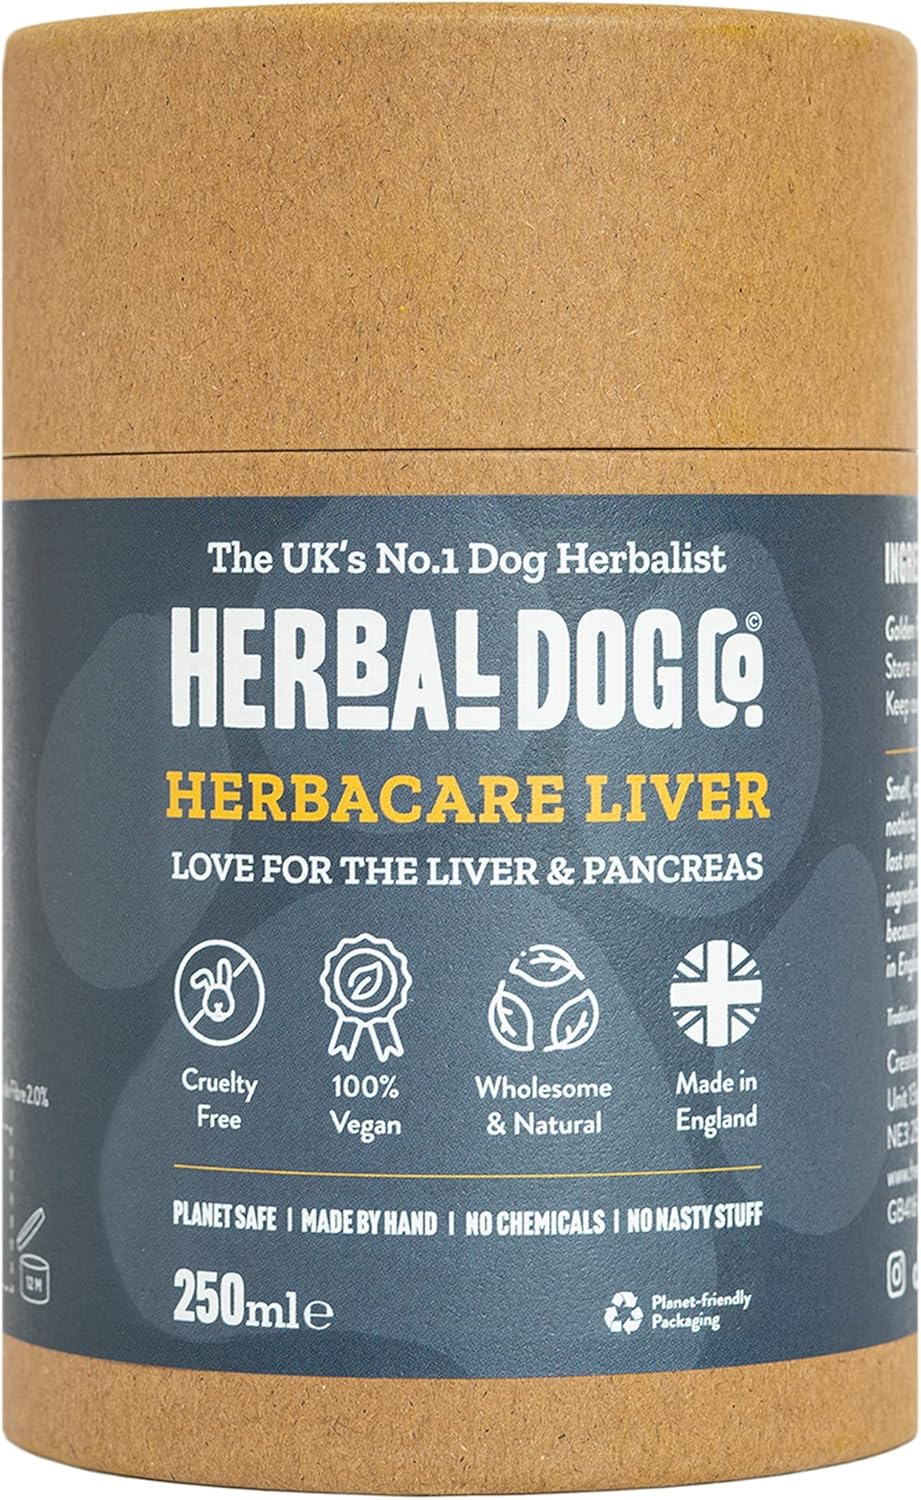 Herbal Dog Co Pancreas & Liver Support, 250ml - Natural Immune Support for Dogs & Puppies - Ideal for Dogs in Recovery or on Medication - All-Natural, Vegan, Made in UK?5060673050325